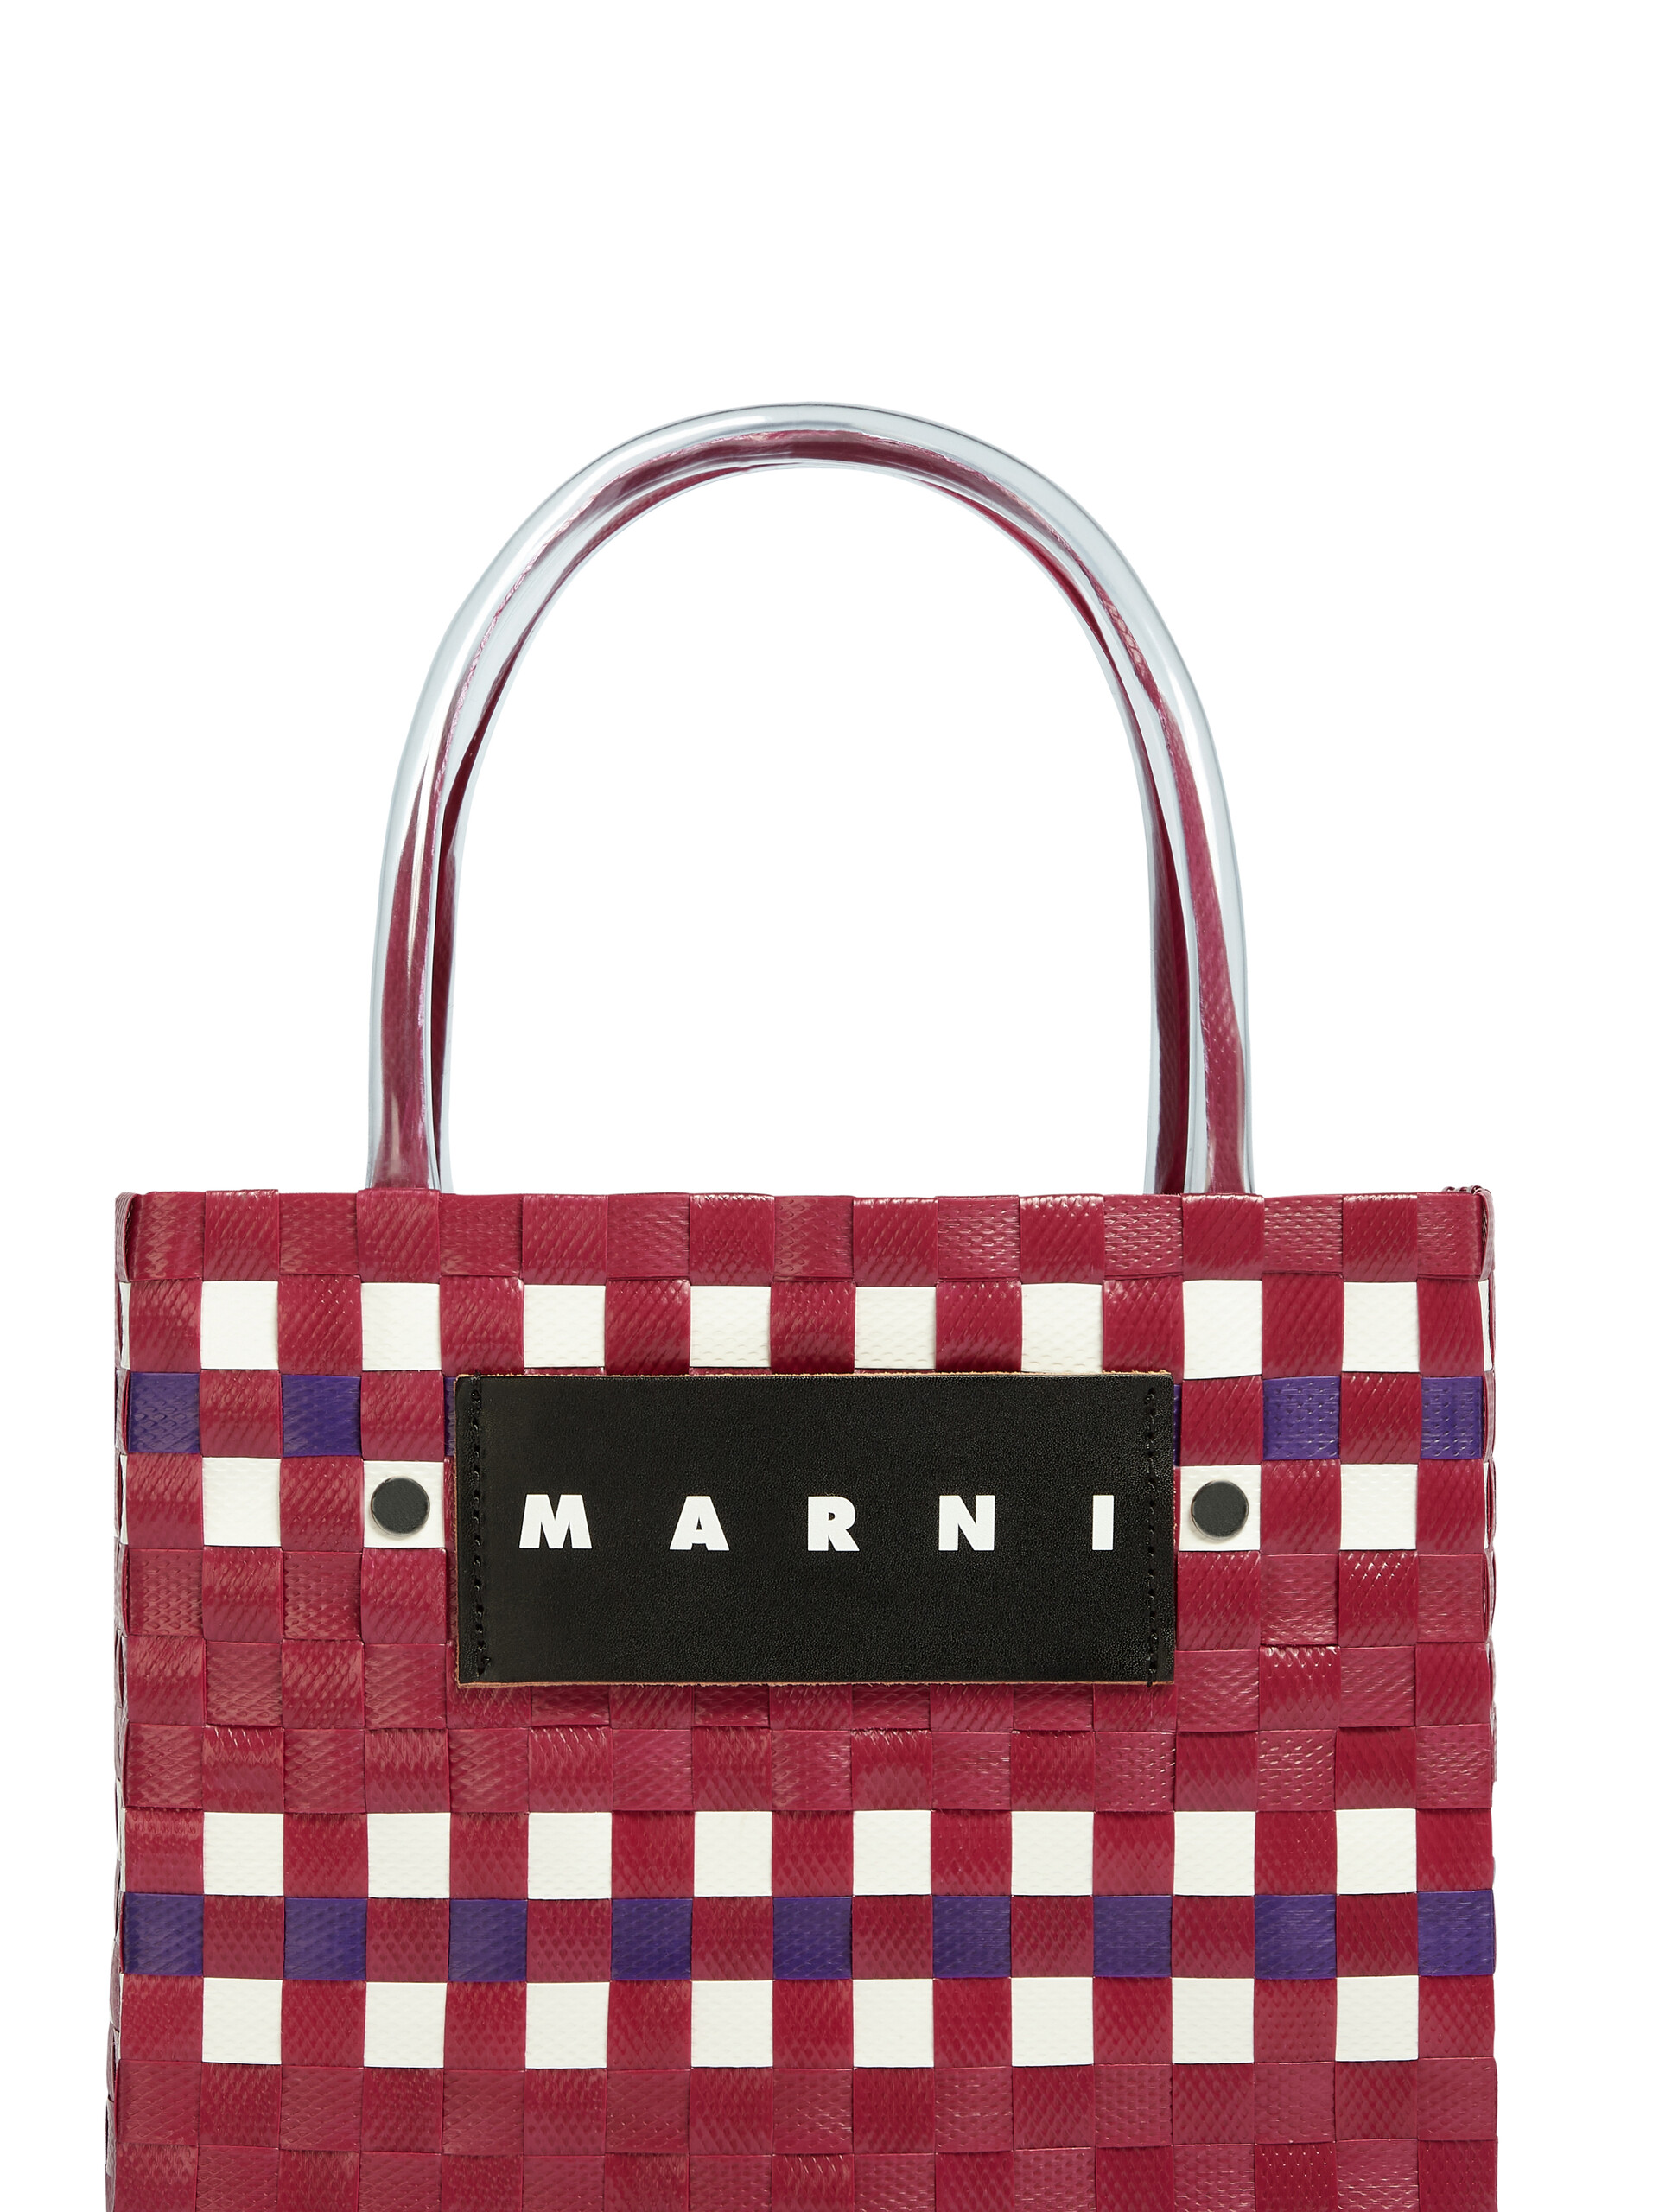 MARNI MARKET BASKET bag in pink woven material - Shopping Bags - Image 4